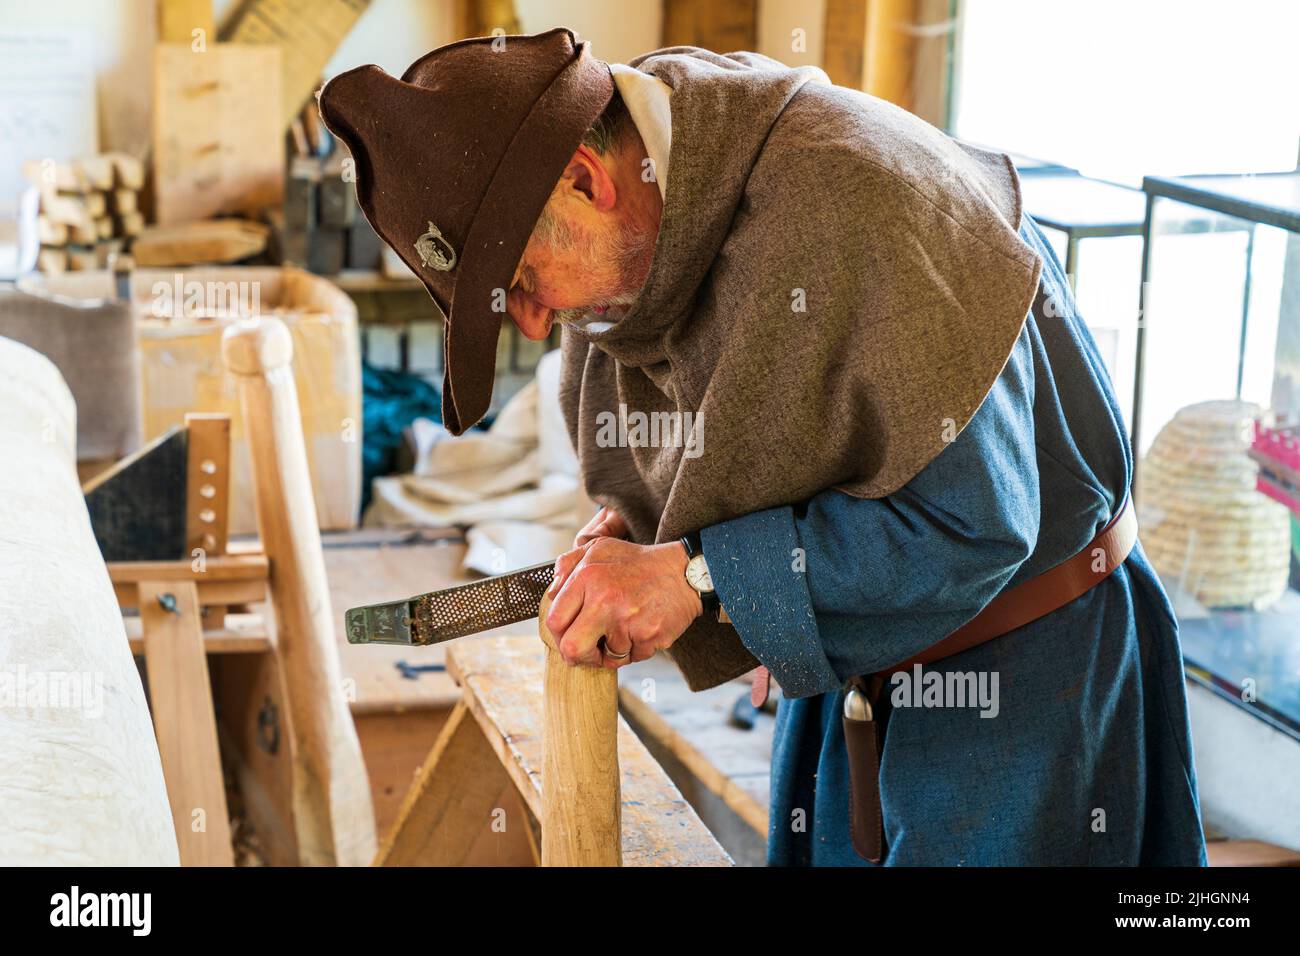 Senior man dressed in Medieval costume of a blue tunic, and brown felt hat, bends over a wooden staff while filing it in a medieval workroom. Stock Photo